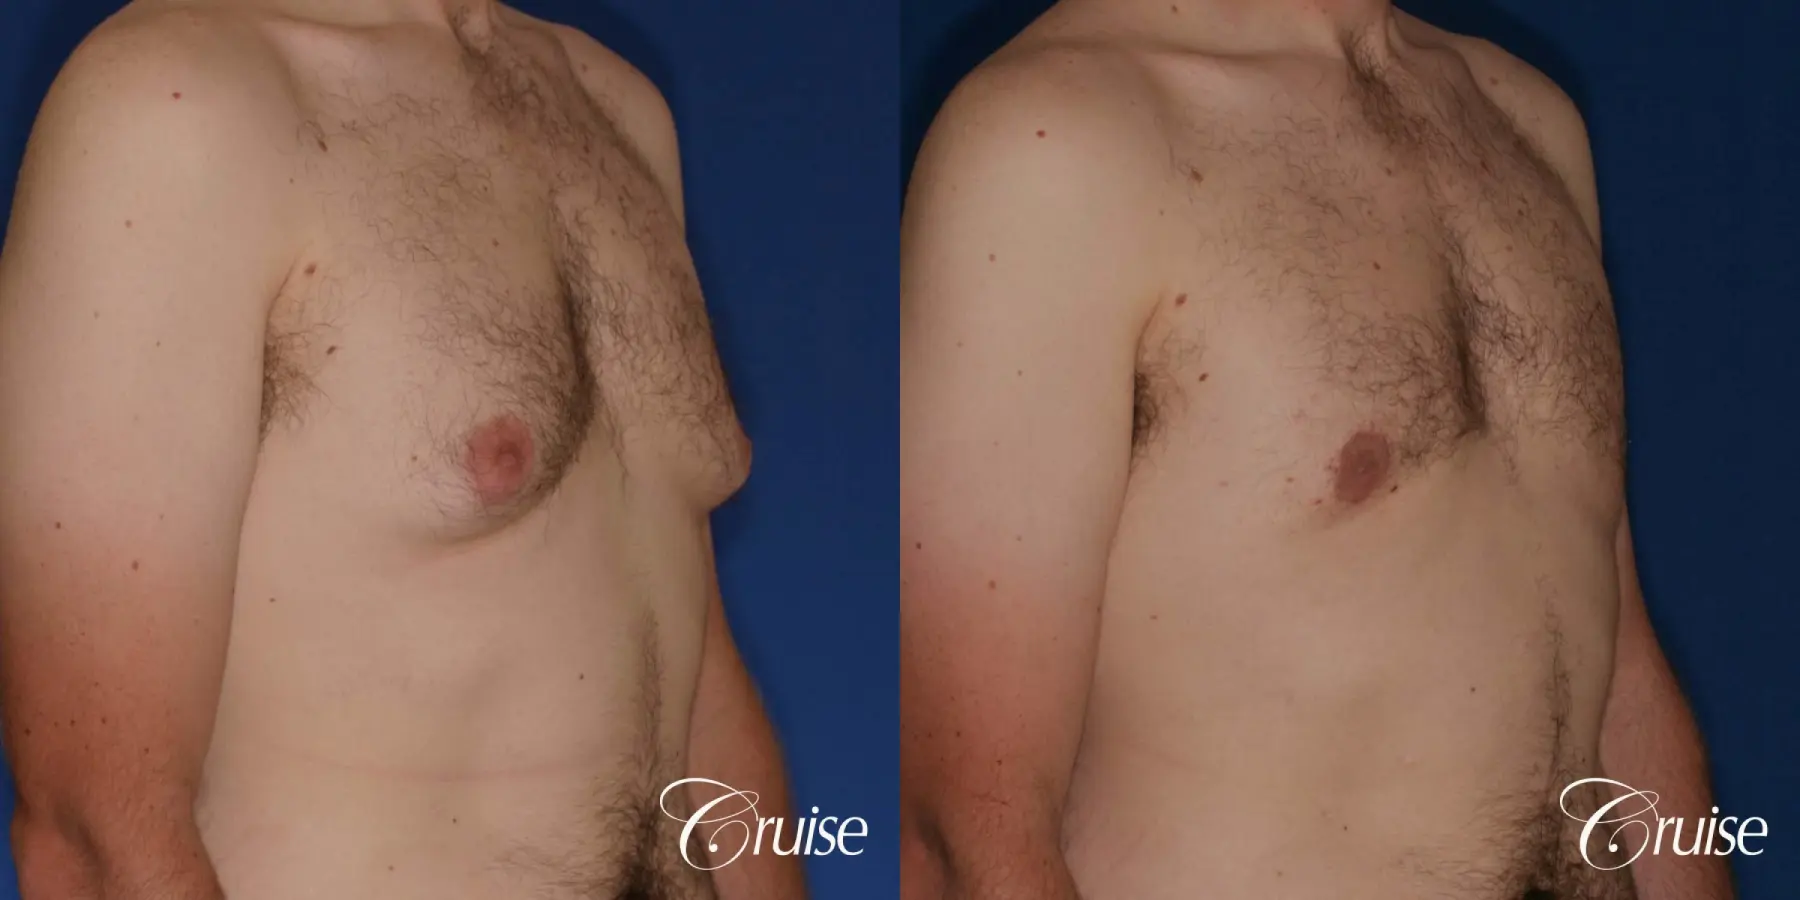 gynecomastia with skin laxity - Before and After 5